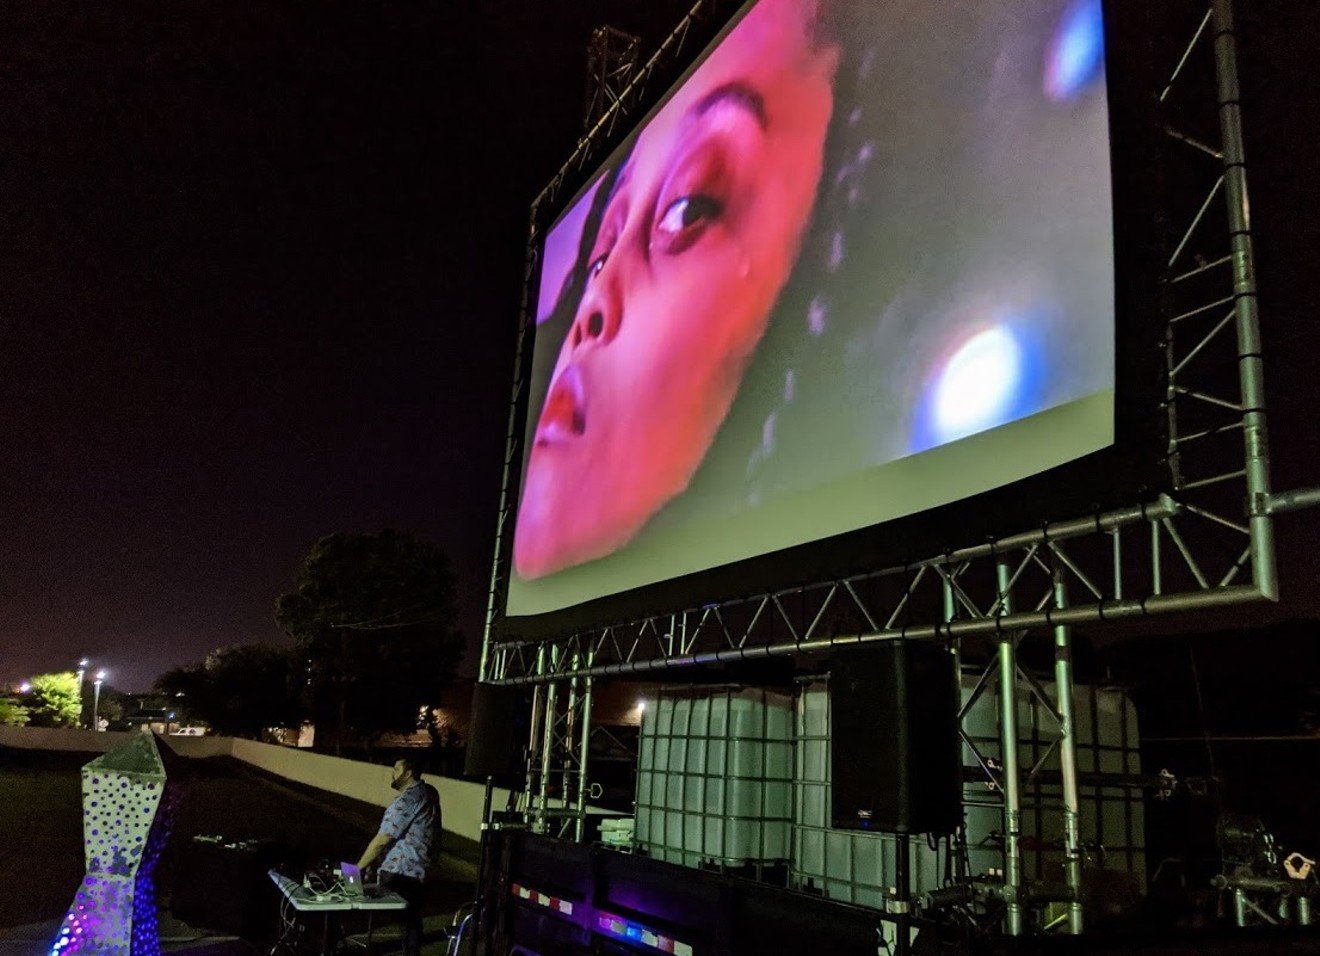 Drive-in movies are a thing again. Thanks, COVID!